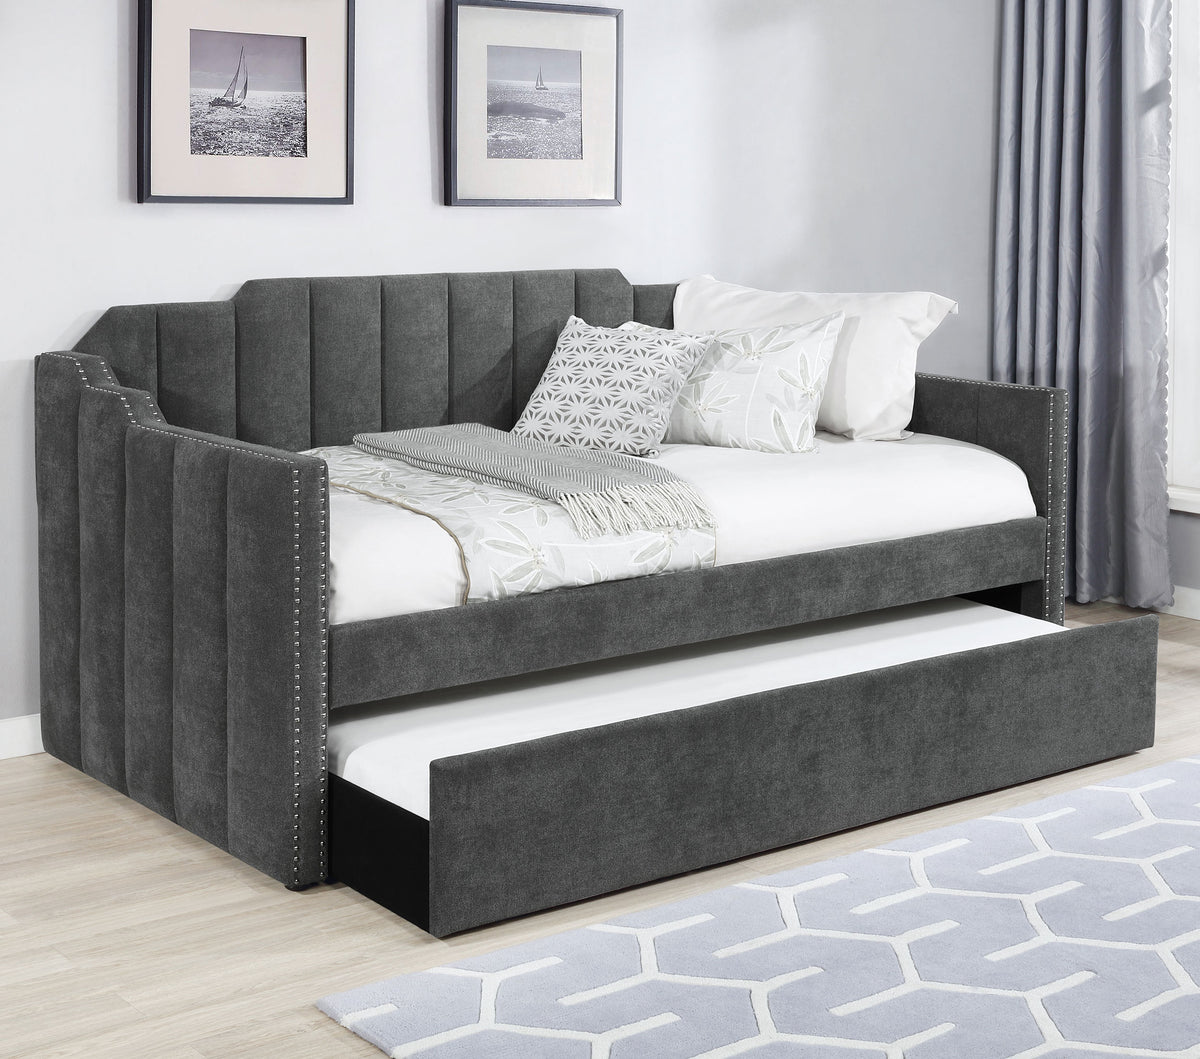 Kingston Upholstered Twin Daybed with Trundle Charcoal Kingston Upholstered Twin Daybed with Trundle Charcoal 